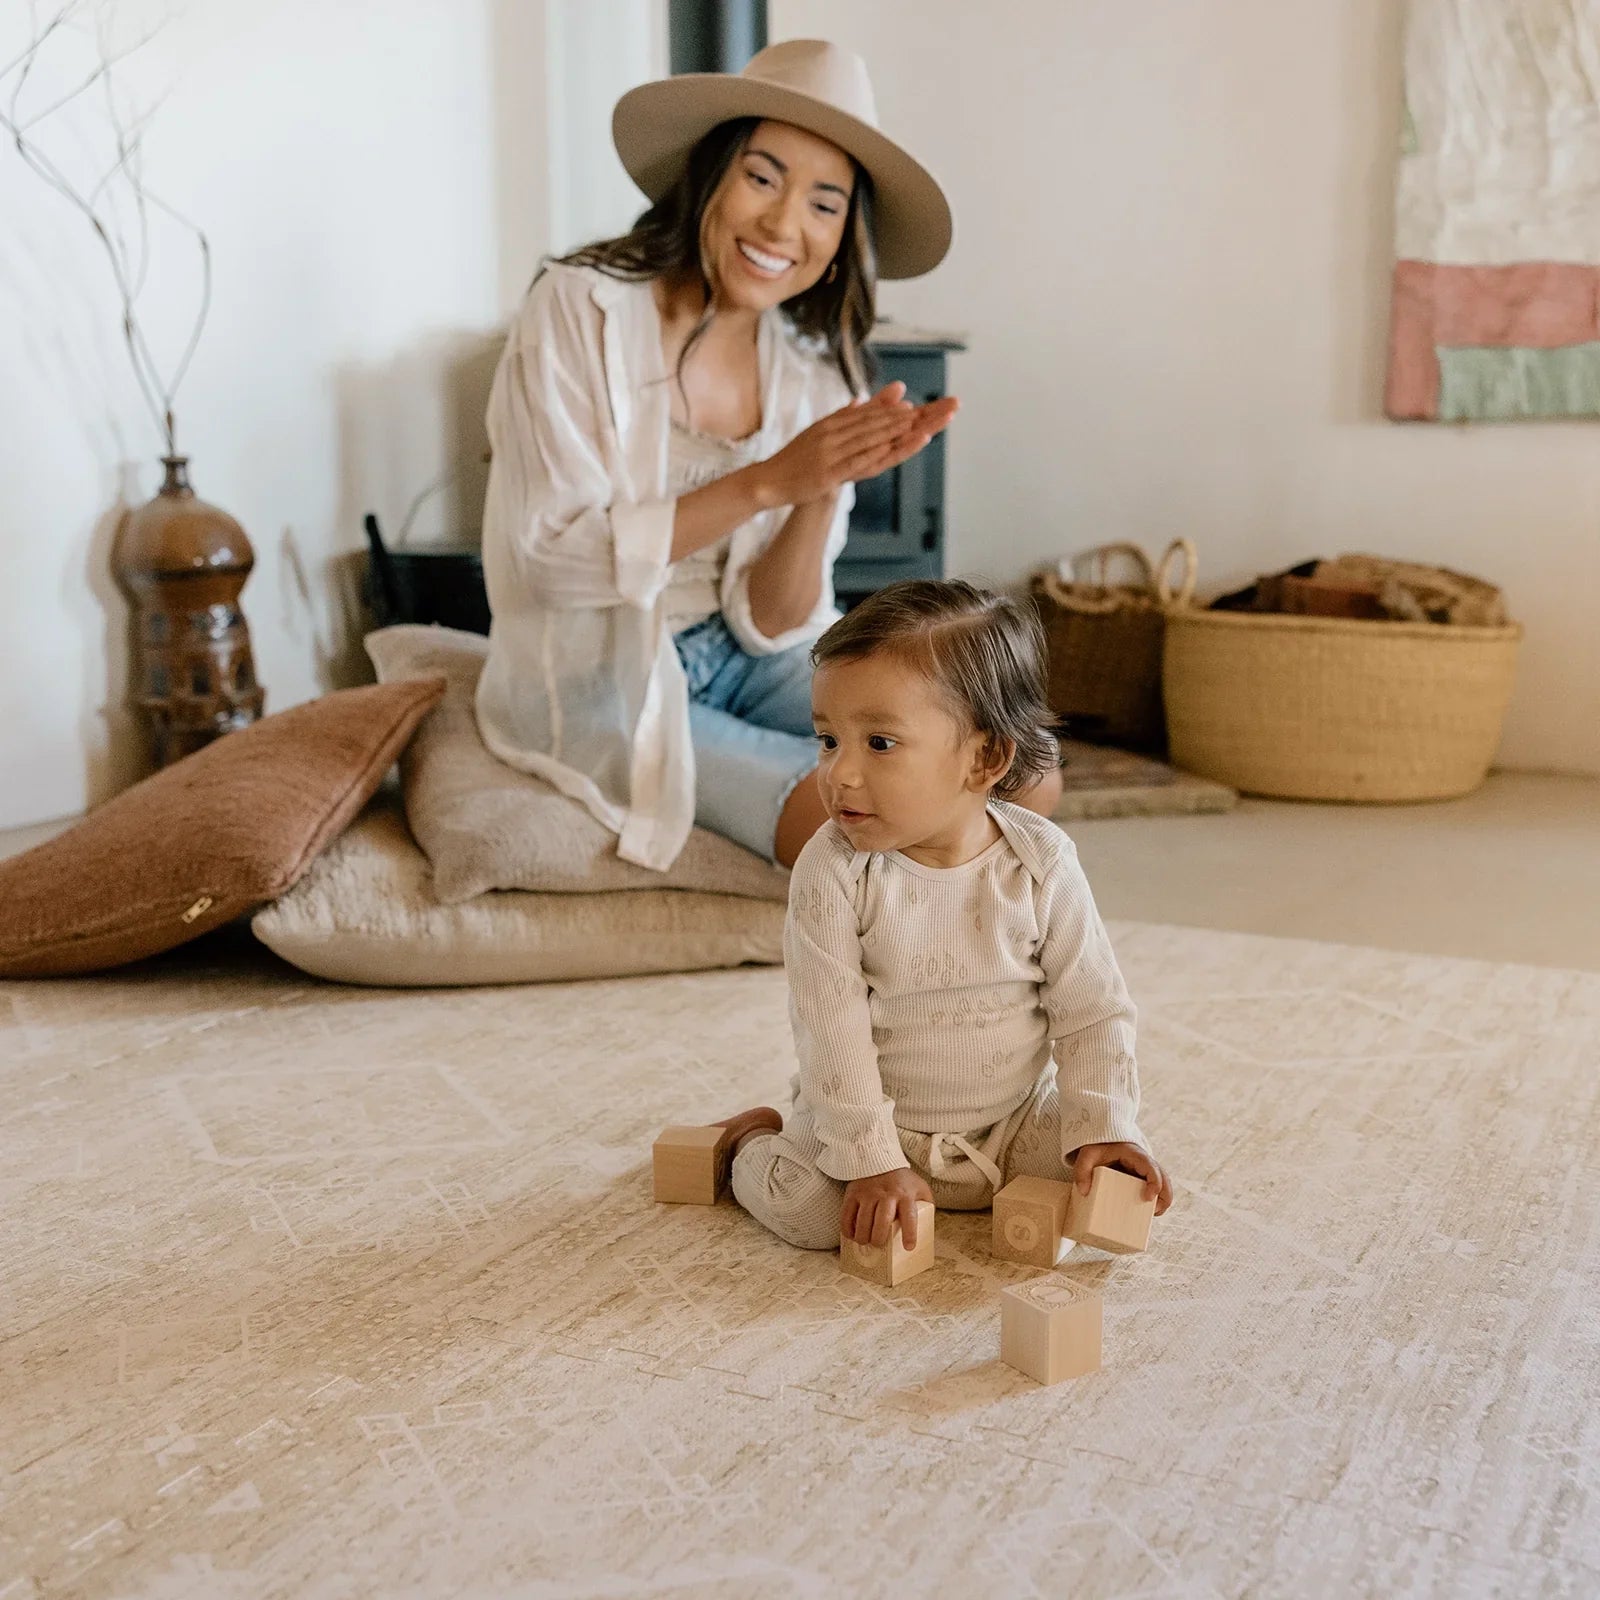 Ula Straw neutral tan minimal boho pattern play mat shown in living room with Mom sitting on pillows and baby boy playing with wooden blocks